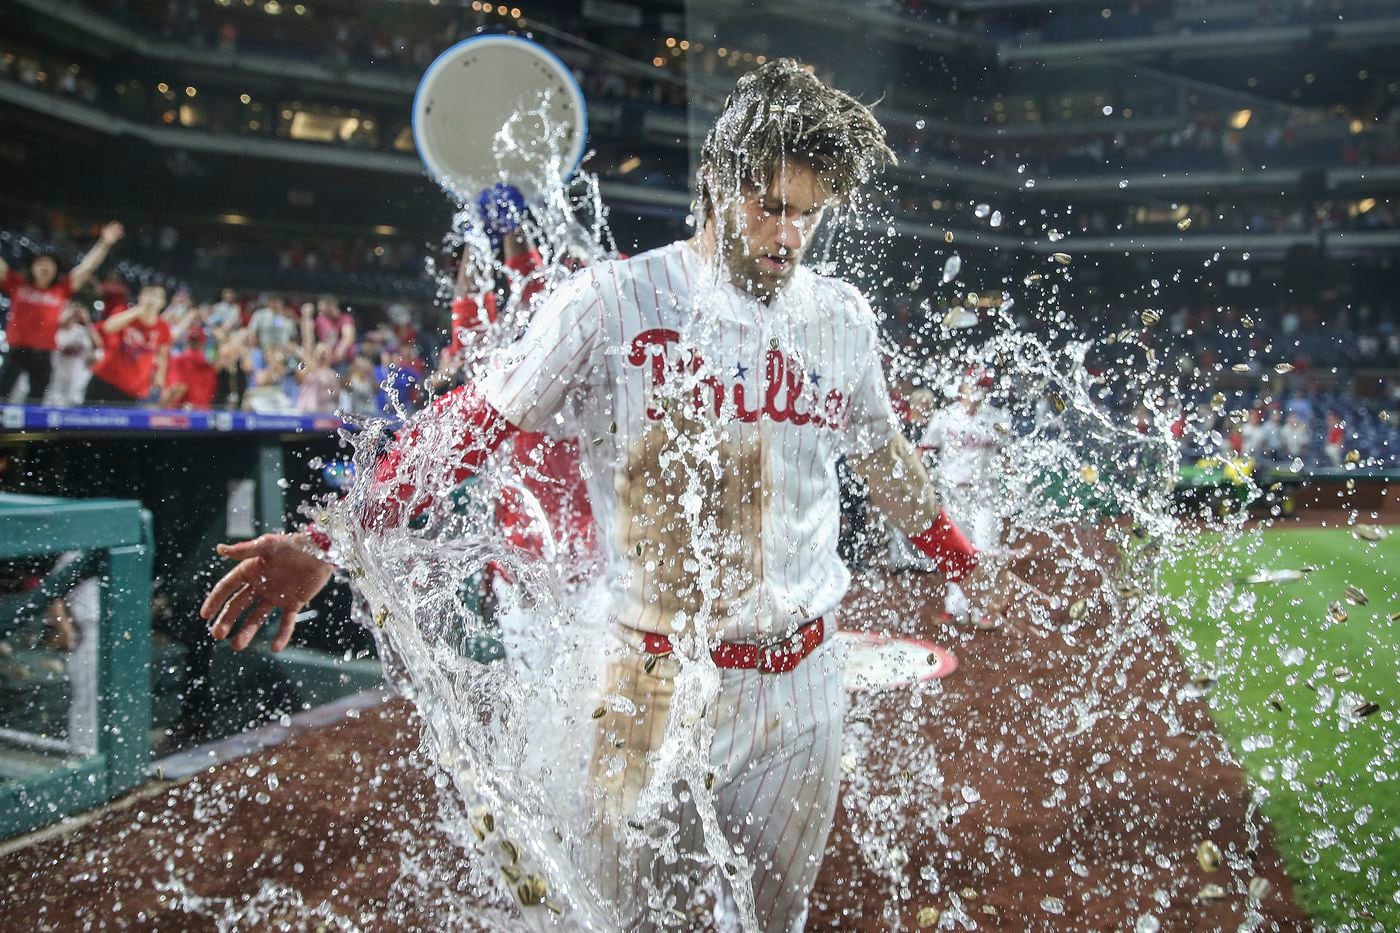 Phillies' Bryce Harper gets a water bath from teammate Jean Segura after his walk-off two run double against the Dodgers to win the game 9-8 at Citizens Bank Park in Philadelphia, Tuesday, July 16, 2019